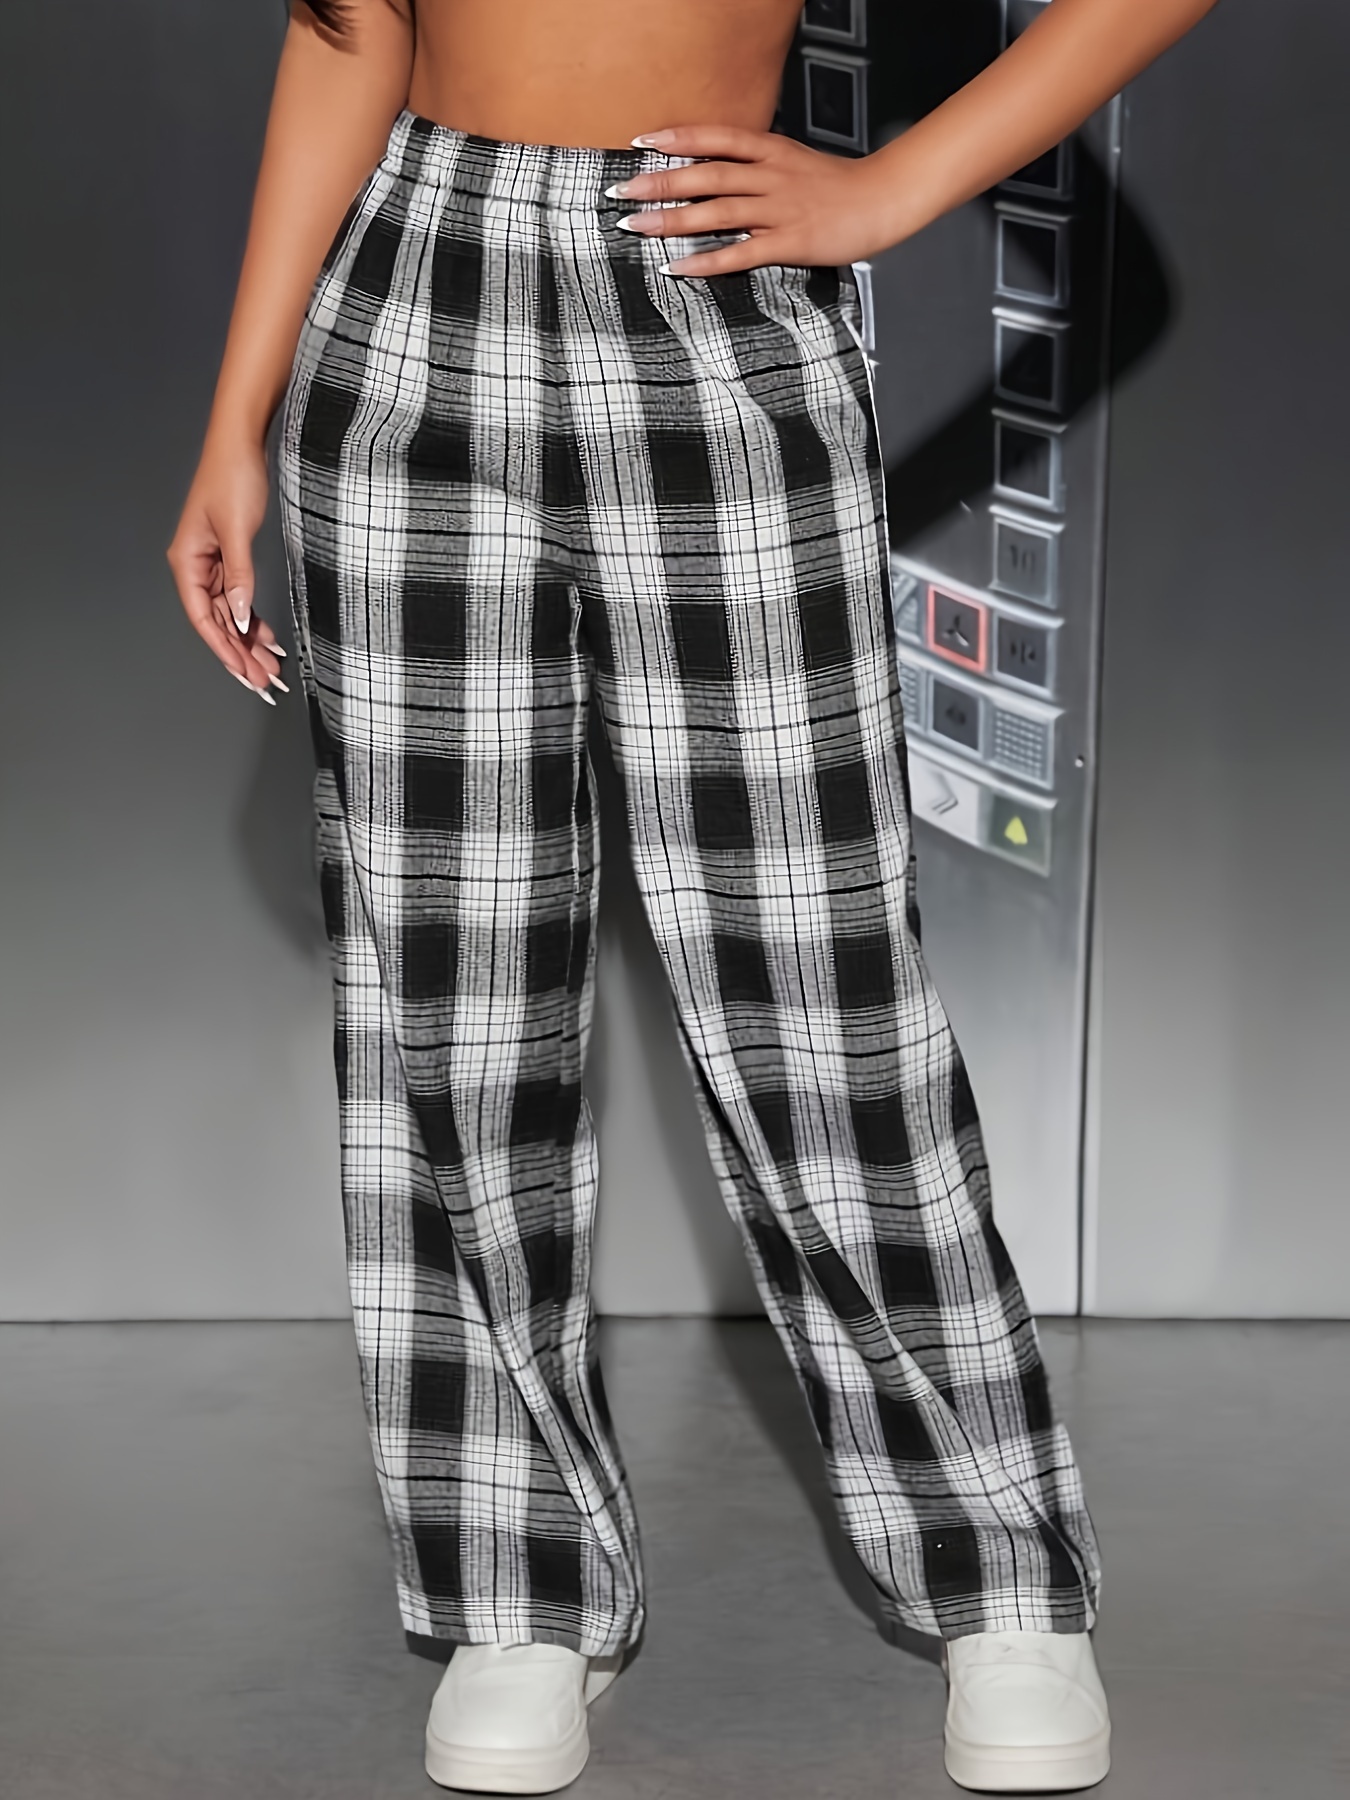 Cheap Women's Everyday Pants, Printing Comfy Leg Pants High Waist Pants  Plaid Stretch Wide Loose Ladys Casual Checkered Pants